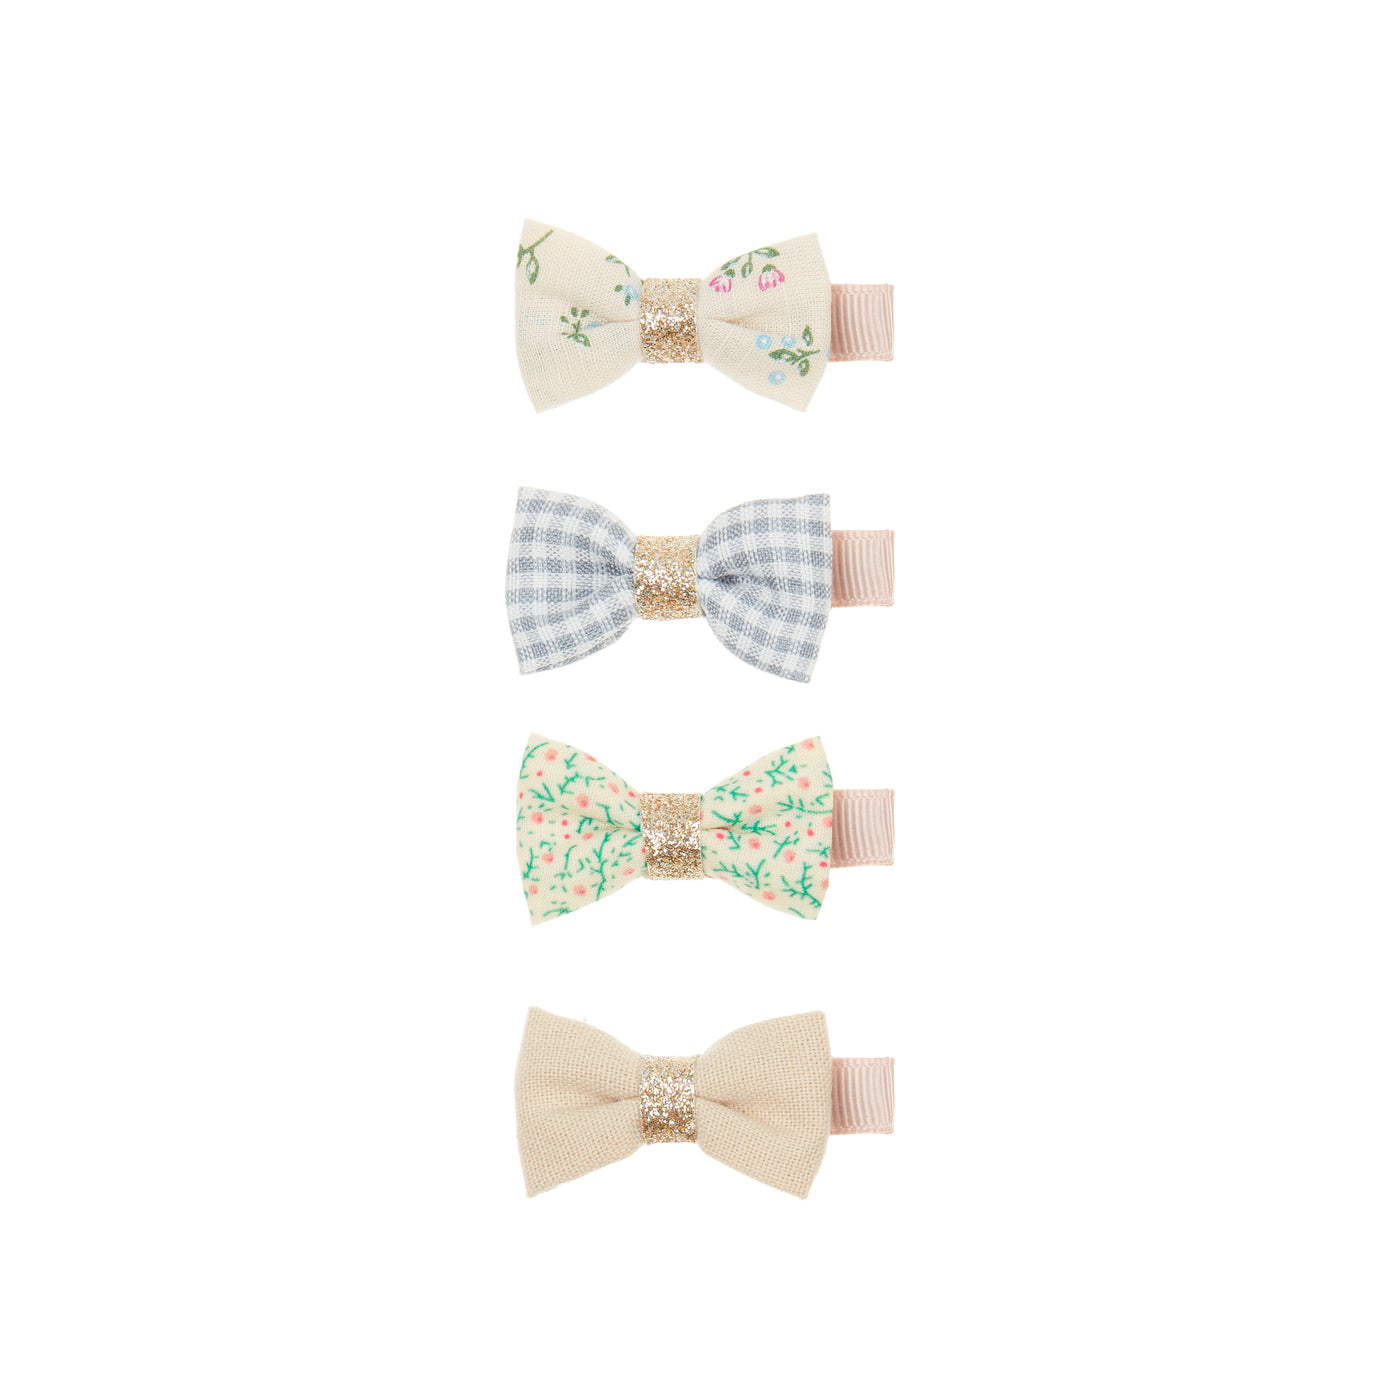 Orchard iris bow clips